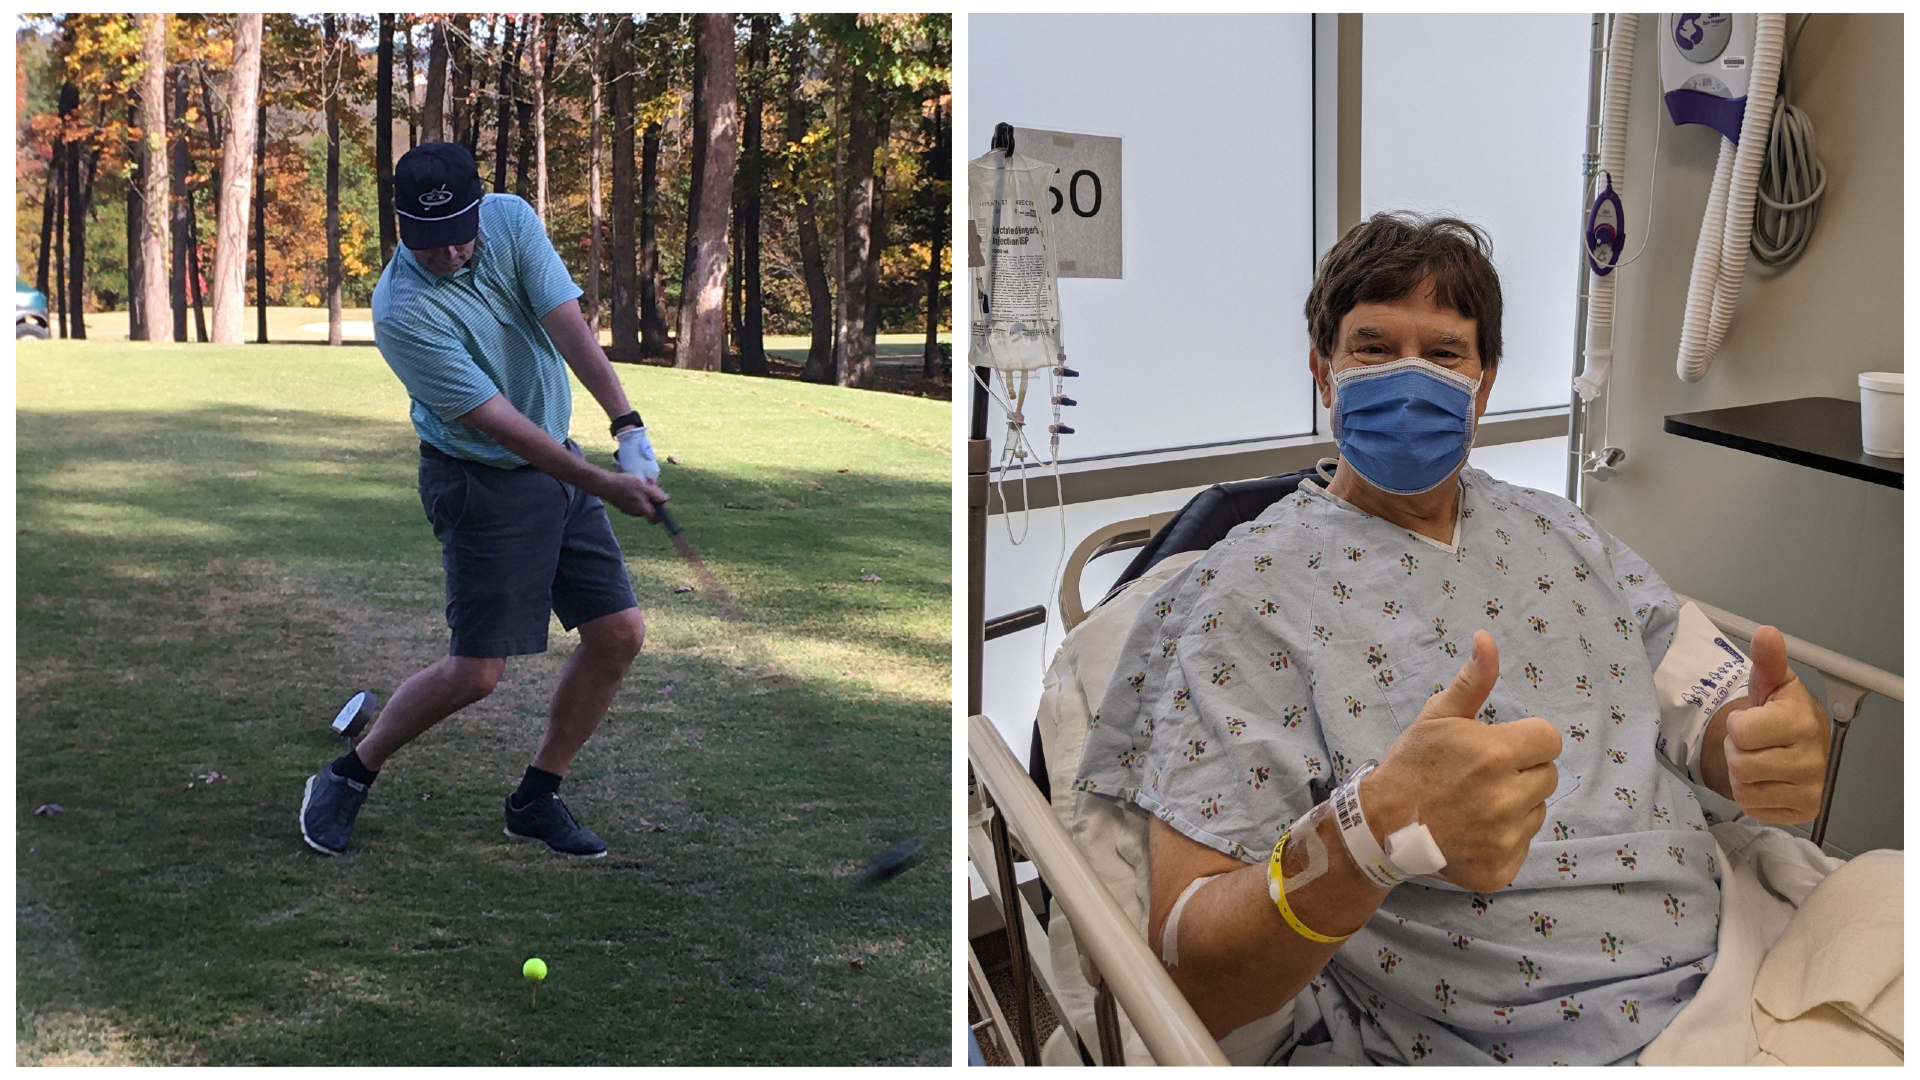 Scott Plassman in the hospital recovering from hip replacement surgery and Scott soon after playing golf